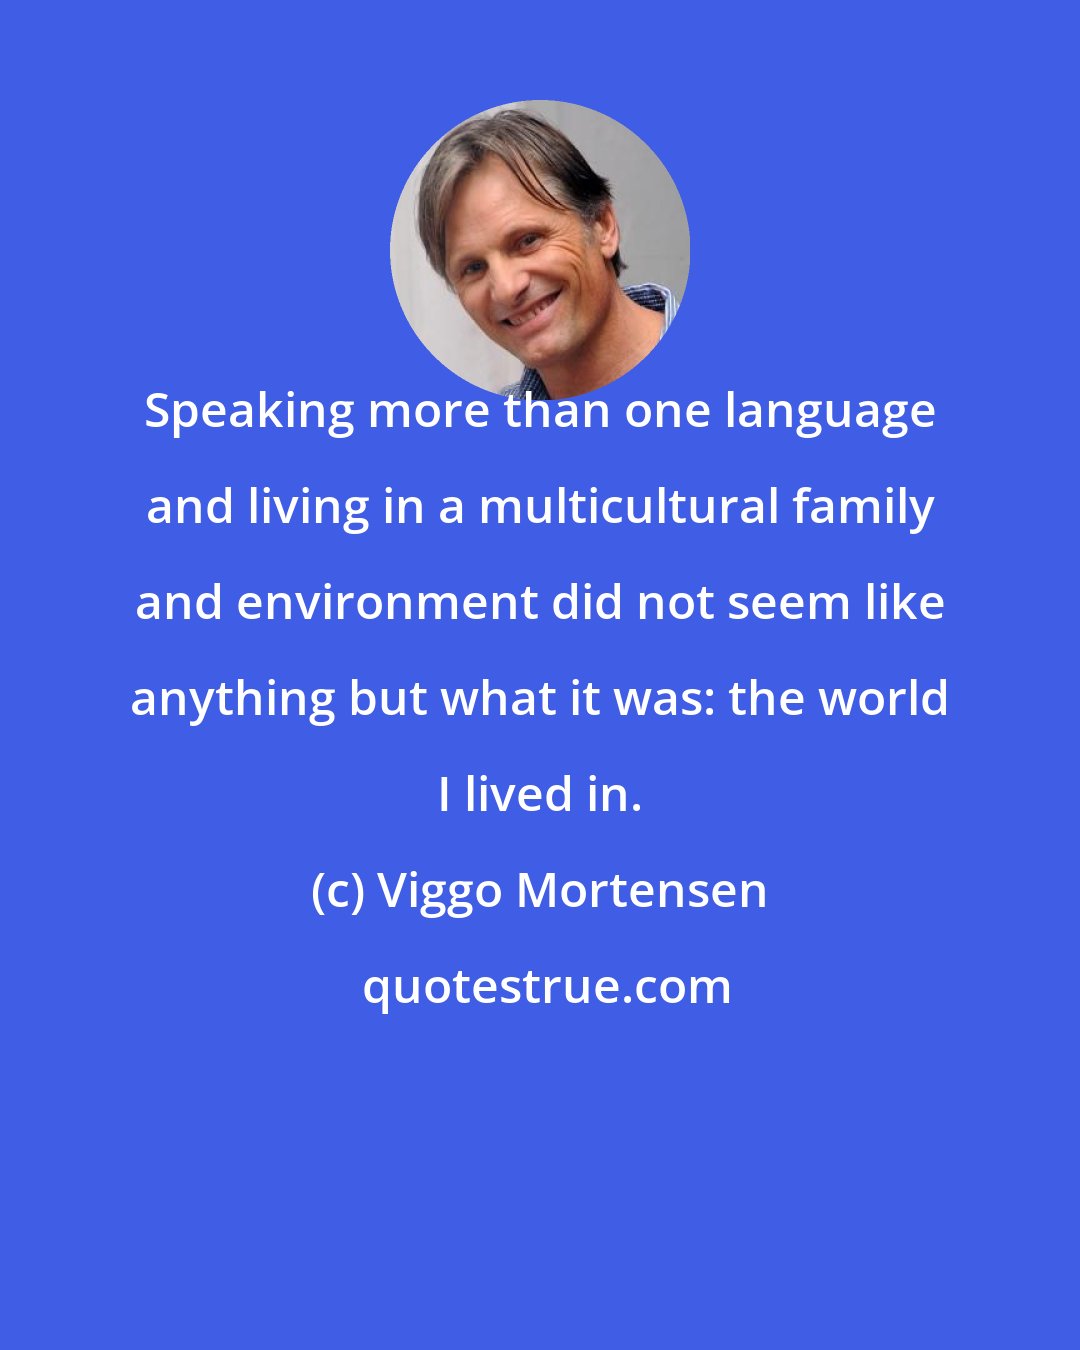 Viggo Mortensen: Speaking more than one language and living in a multicultural family and environment did not seem like anything but what it was: the world I lived in.